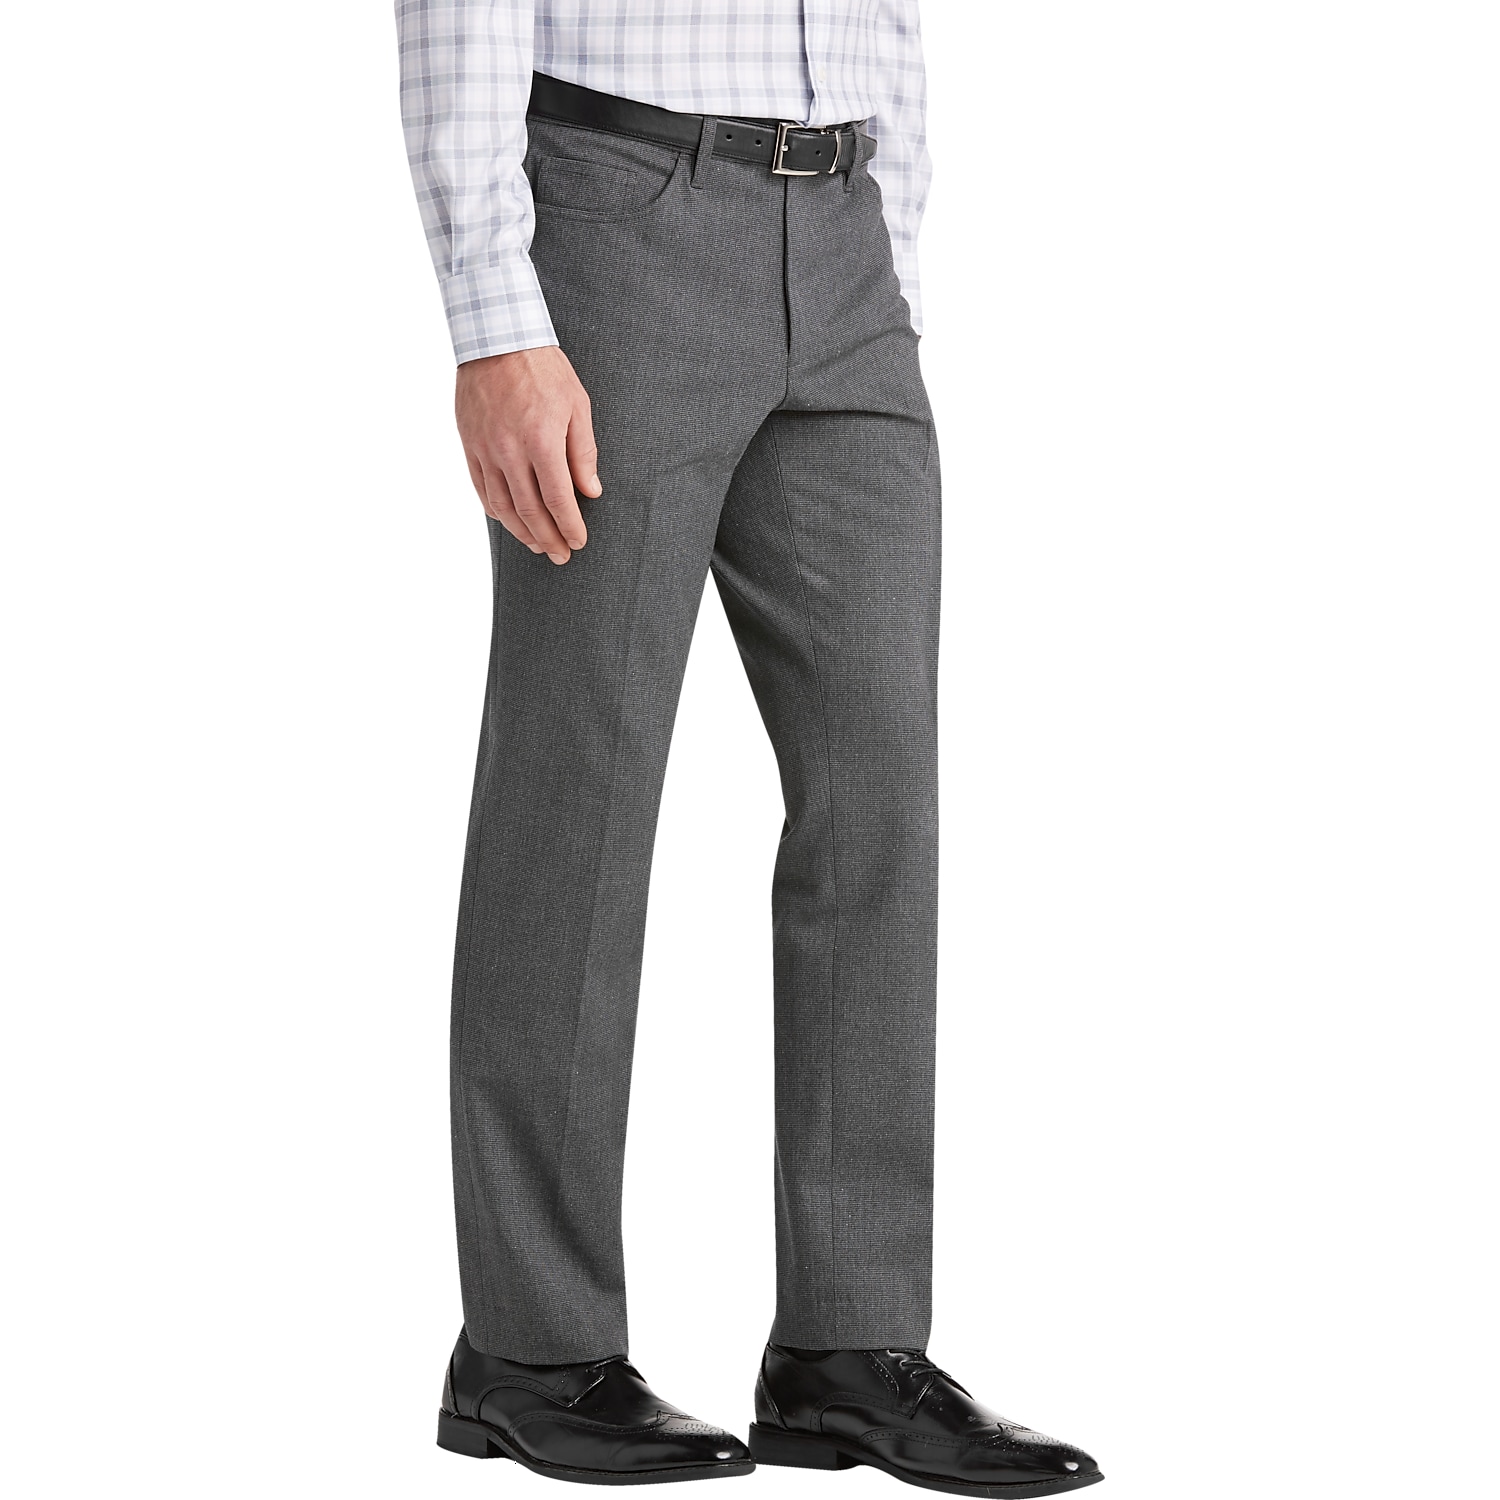 Twill Pants Definition | Pant So